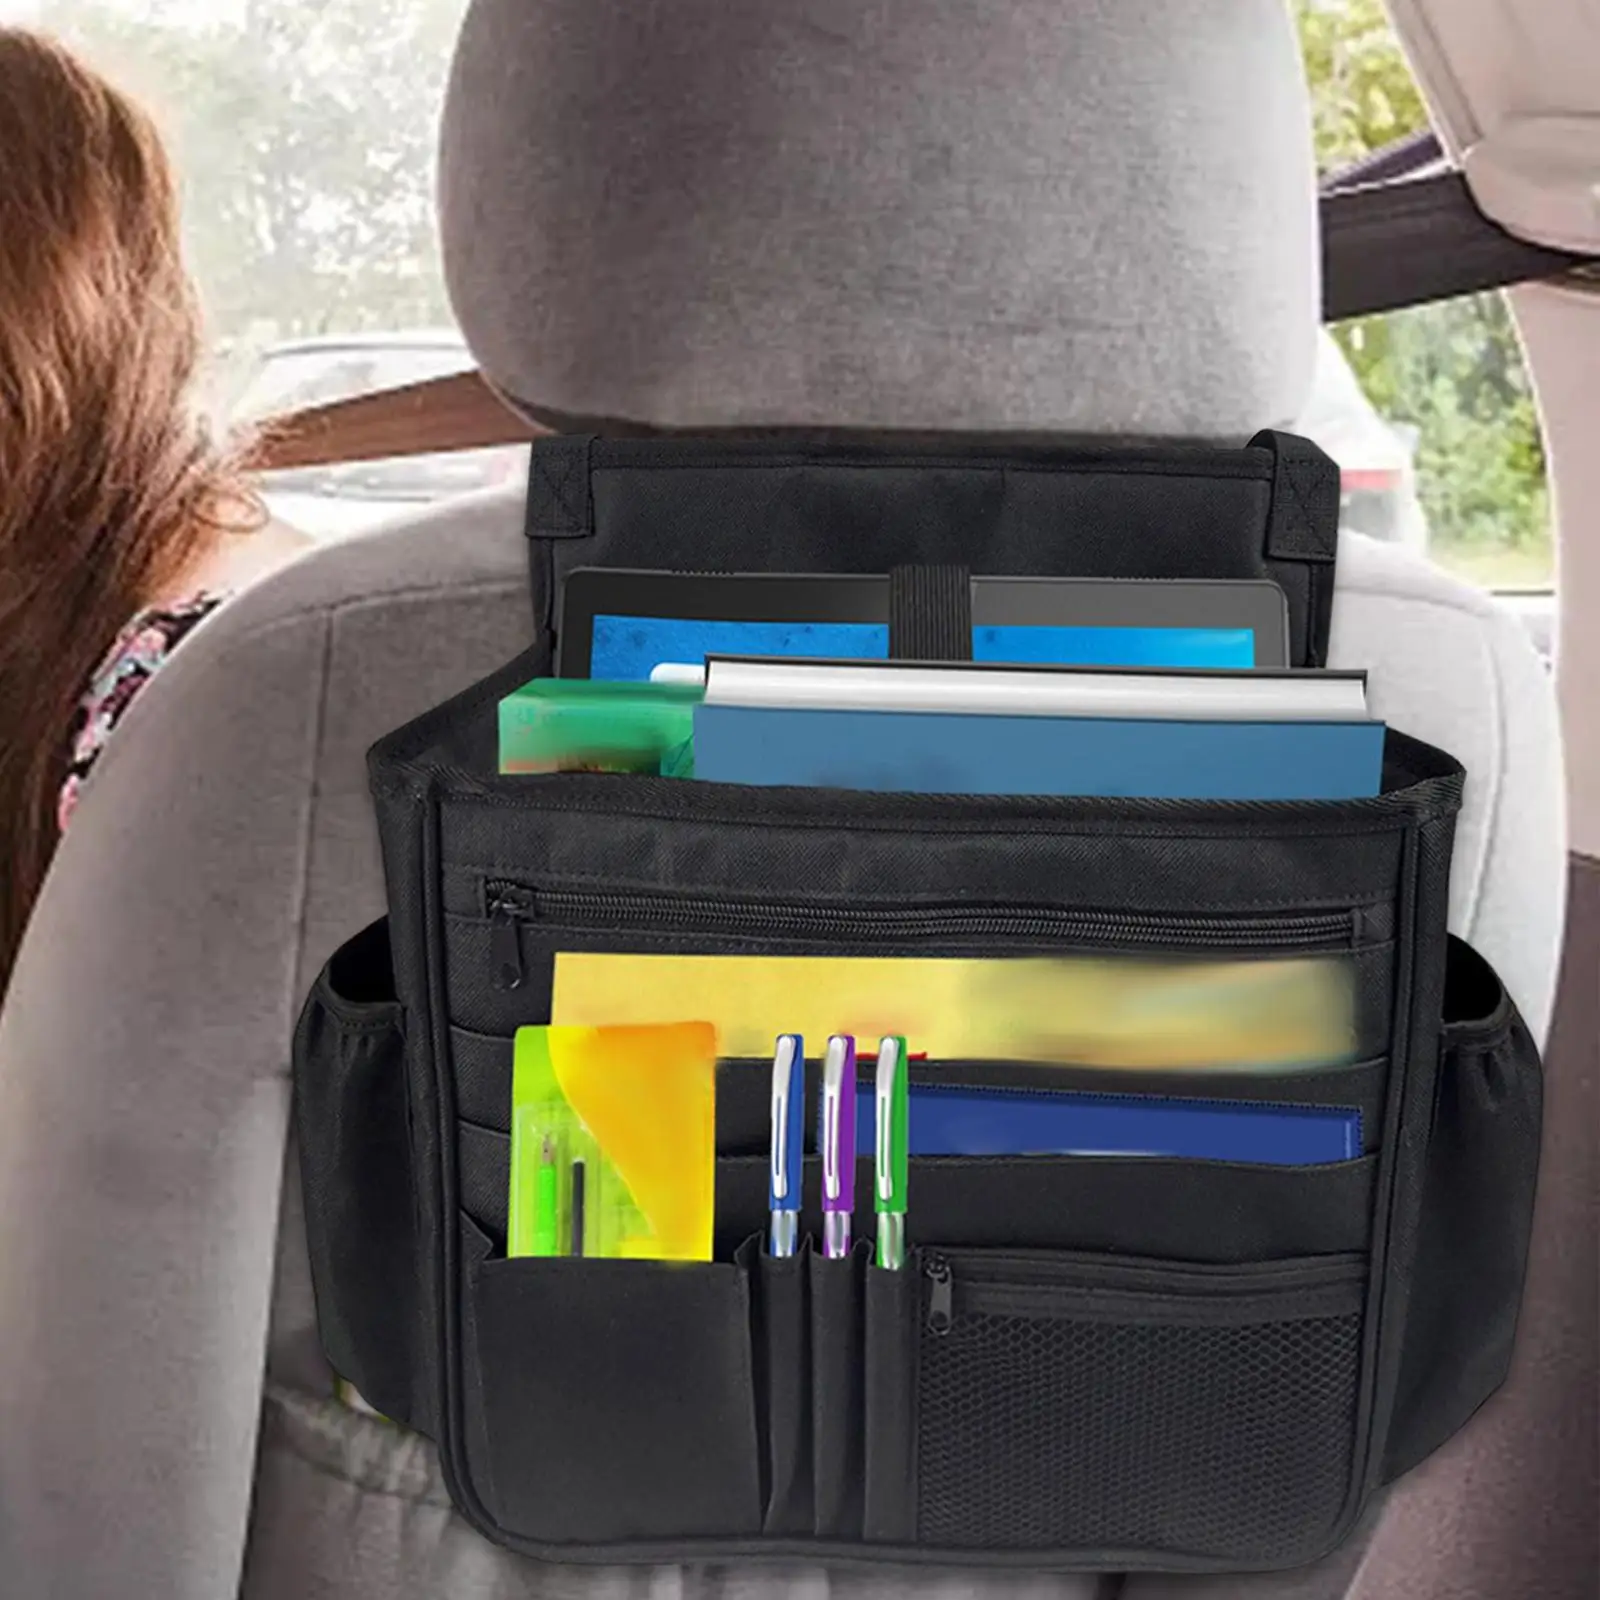 Car Backseat Organizer Durable Oxford Cloth Protector for Books Bottle